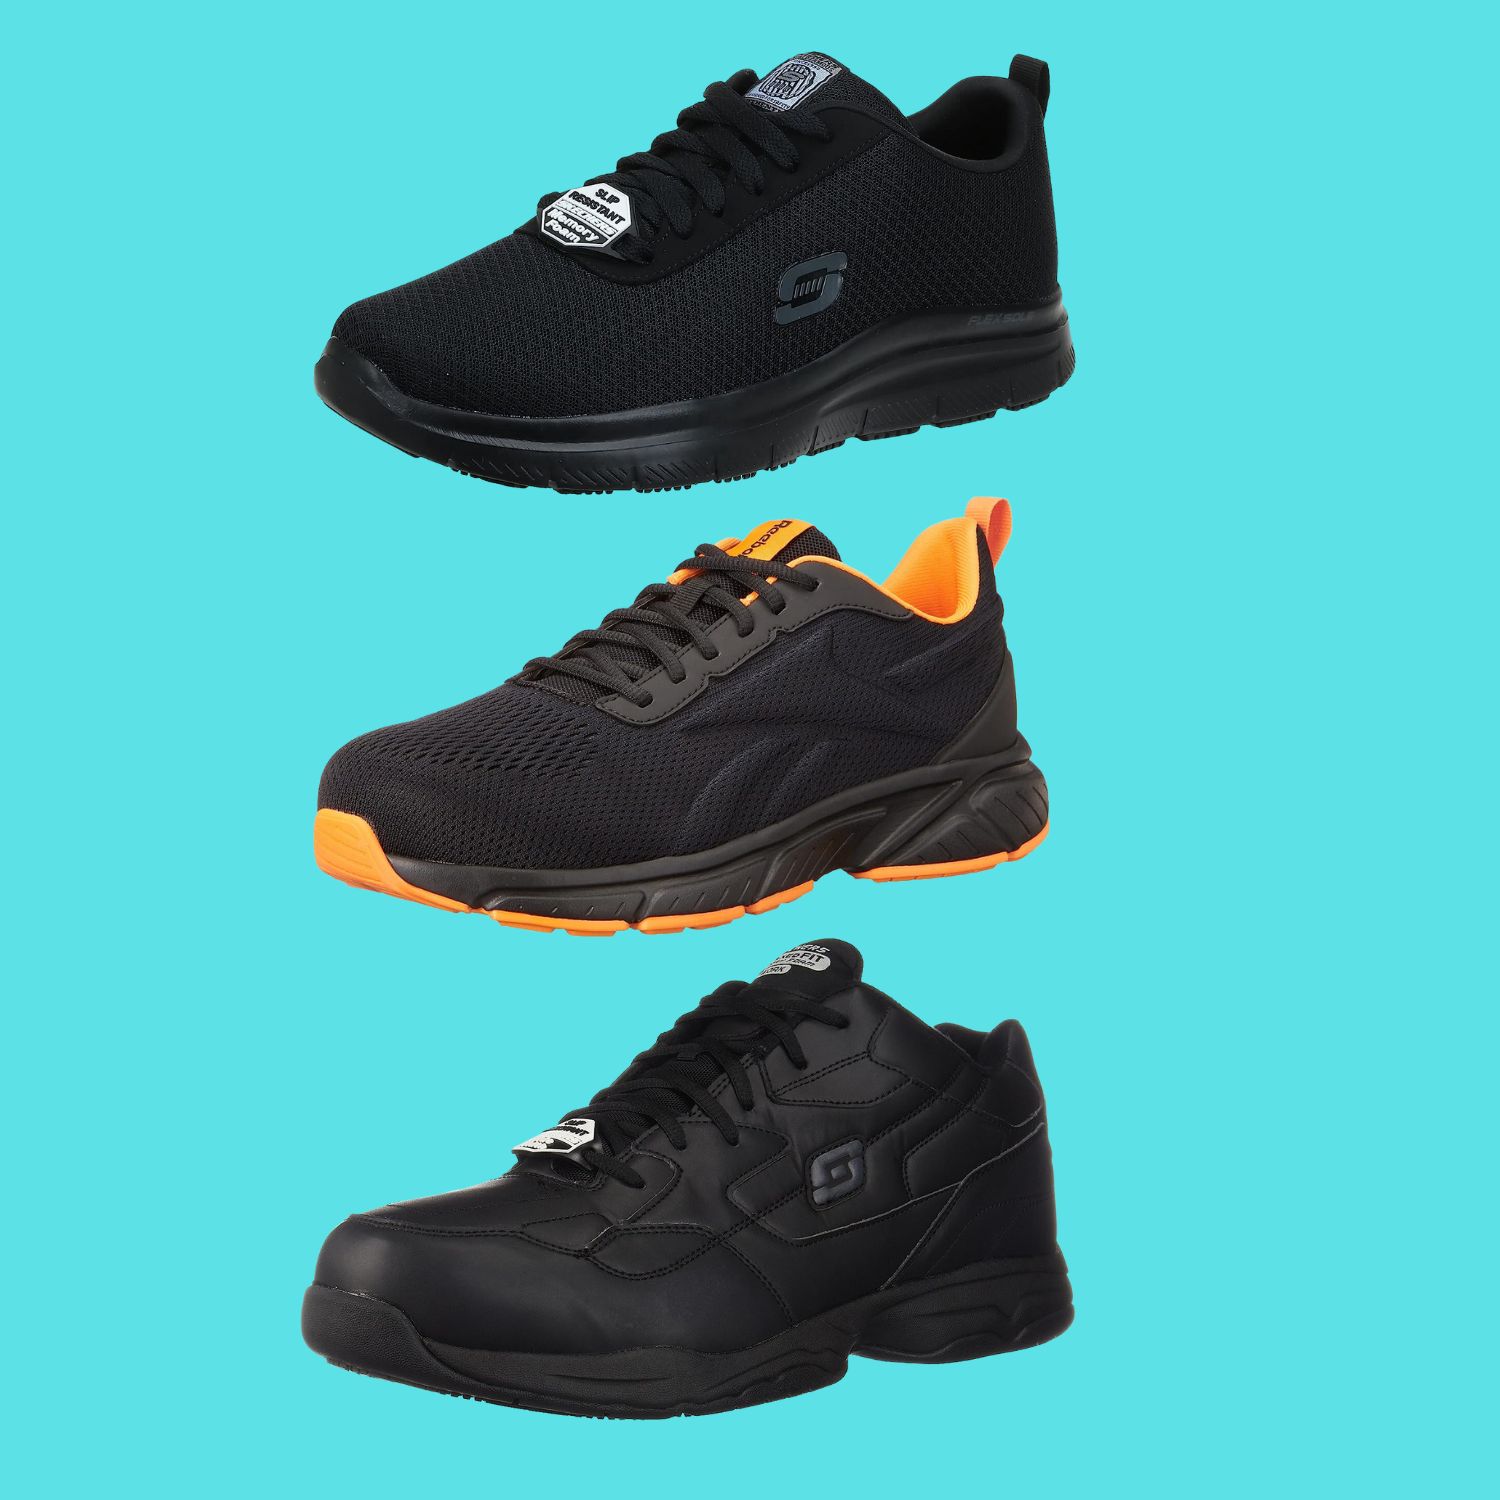 The 8 Best Shoes for UPS Drivers Revealed: Attention UPS Drivers!